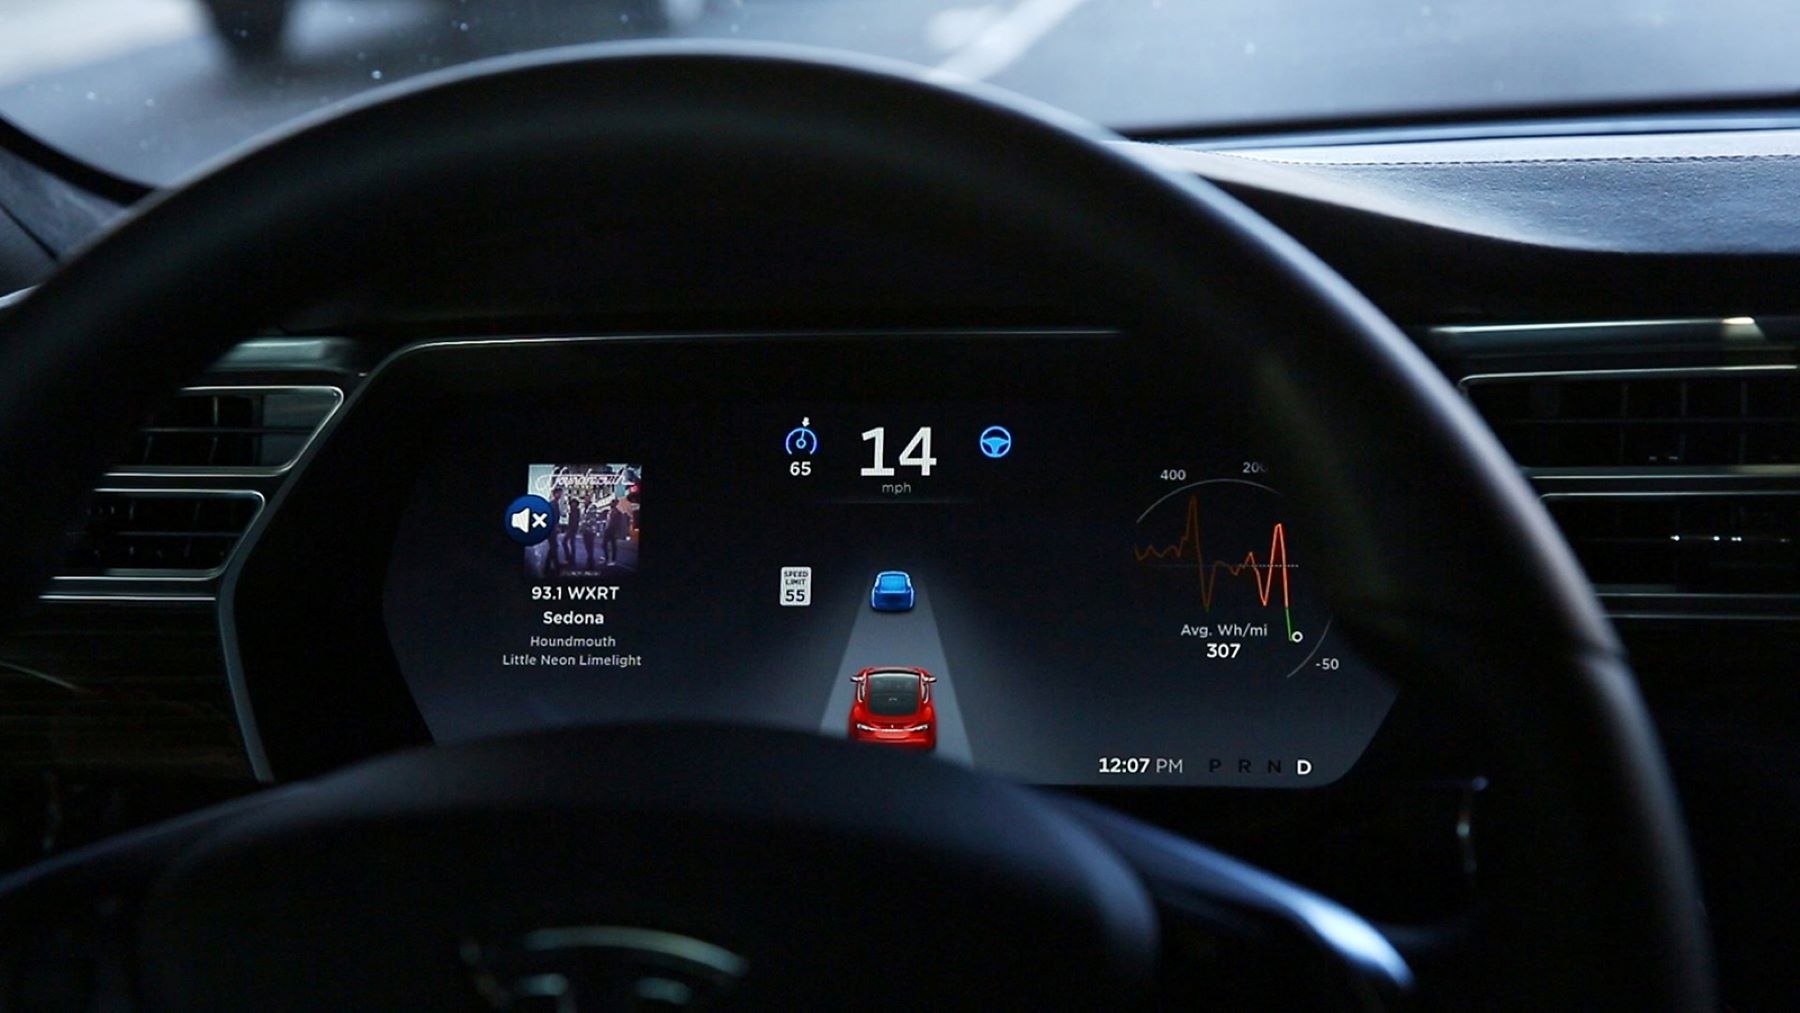 A Tesla vehicle's driver's display using icons to enable autopilot